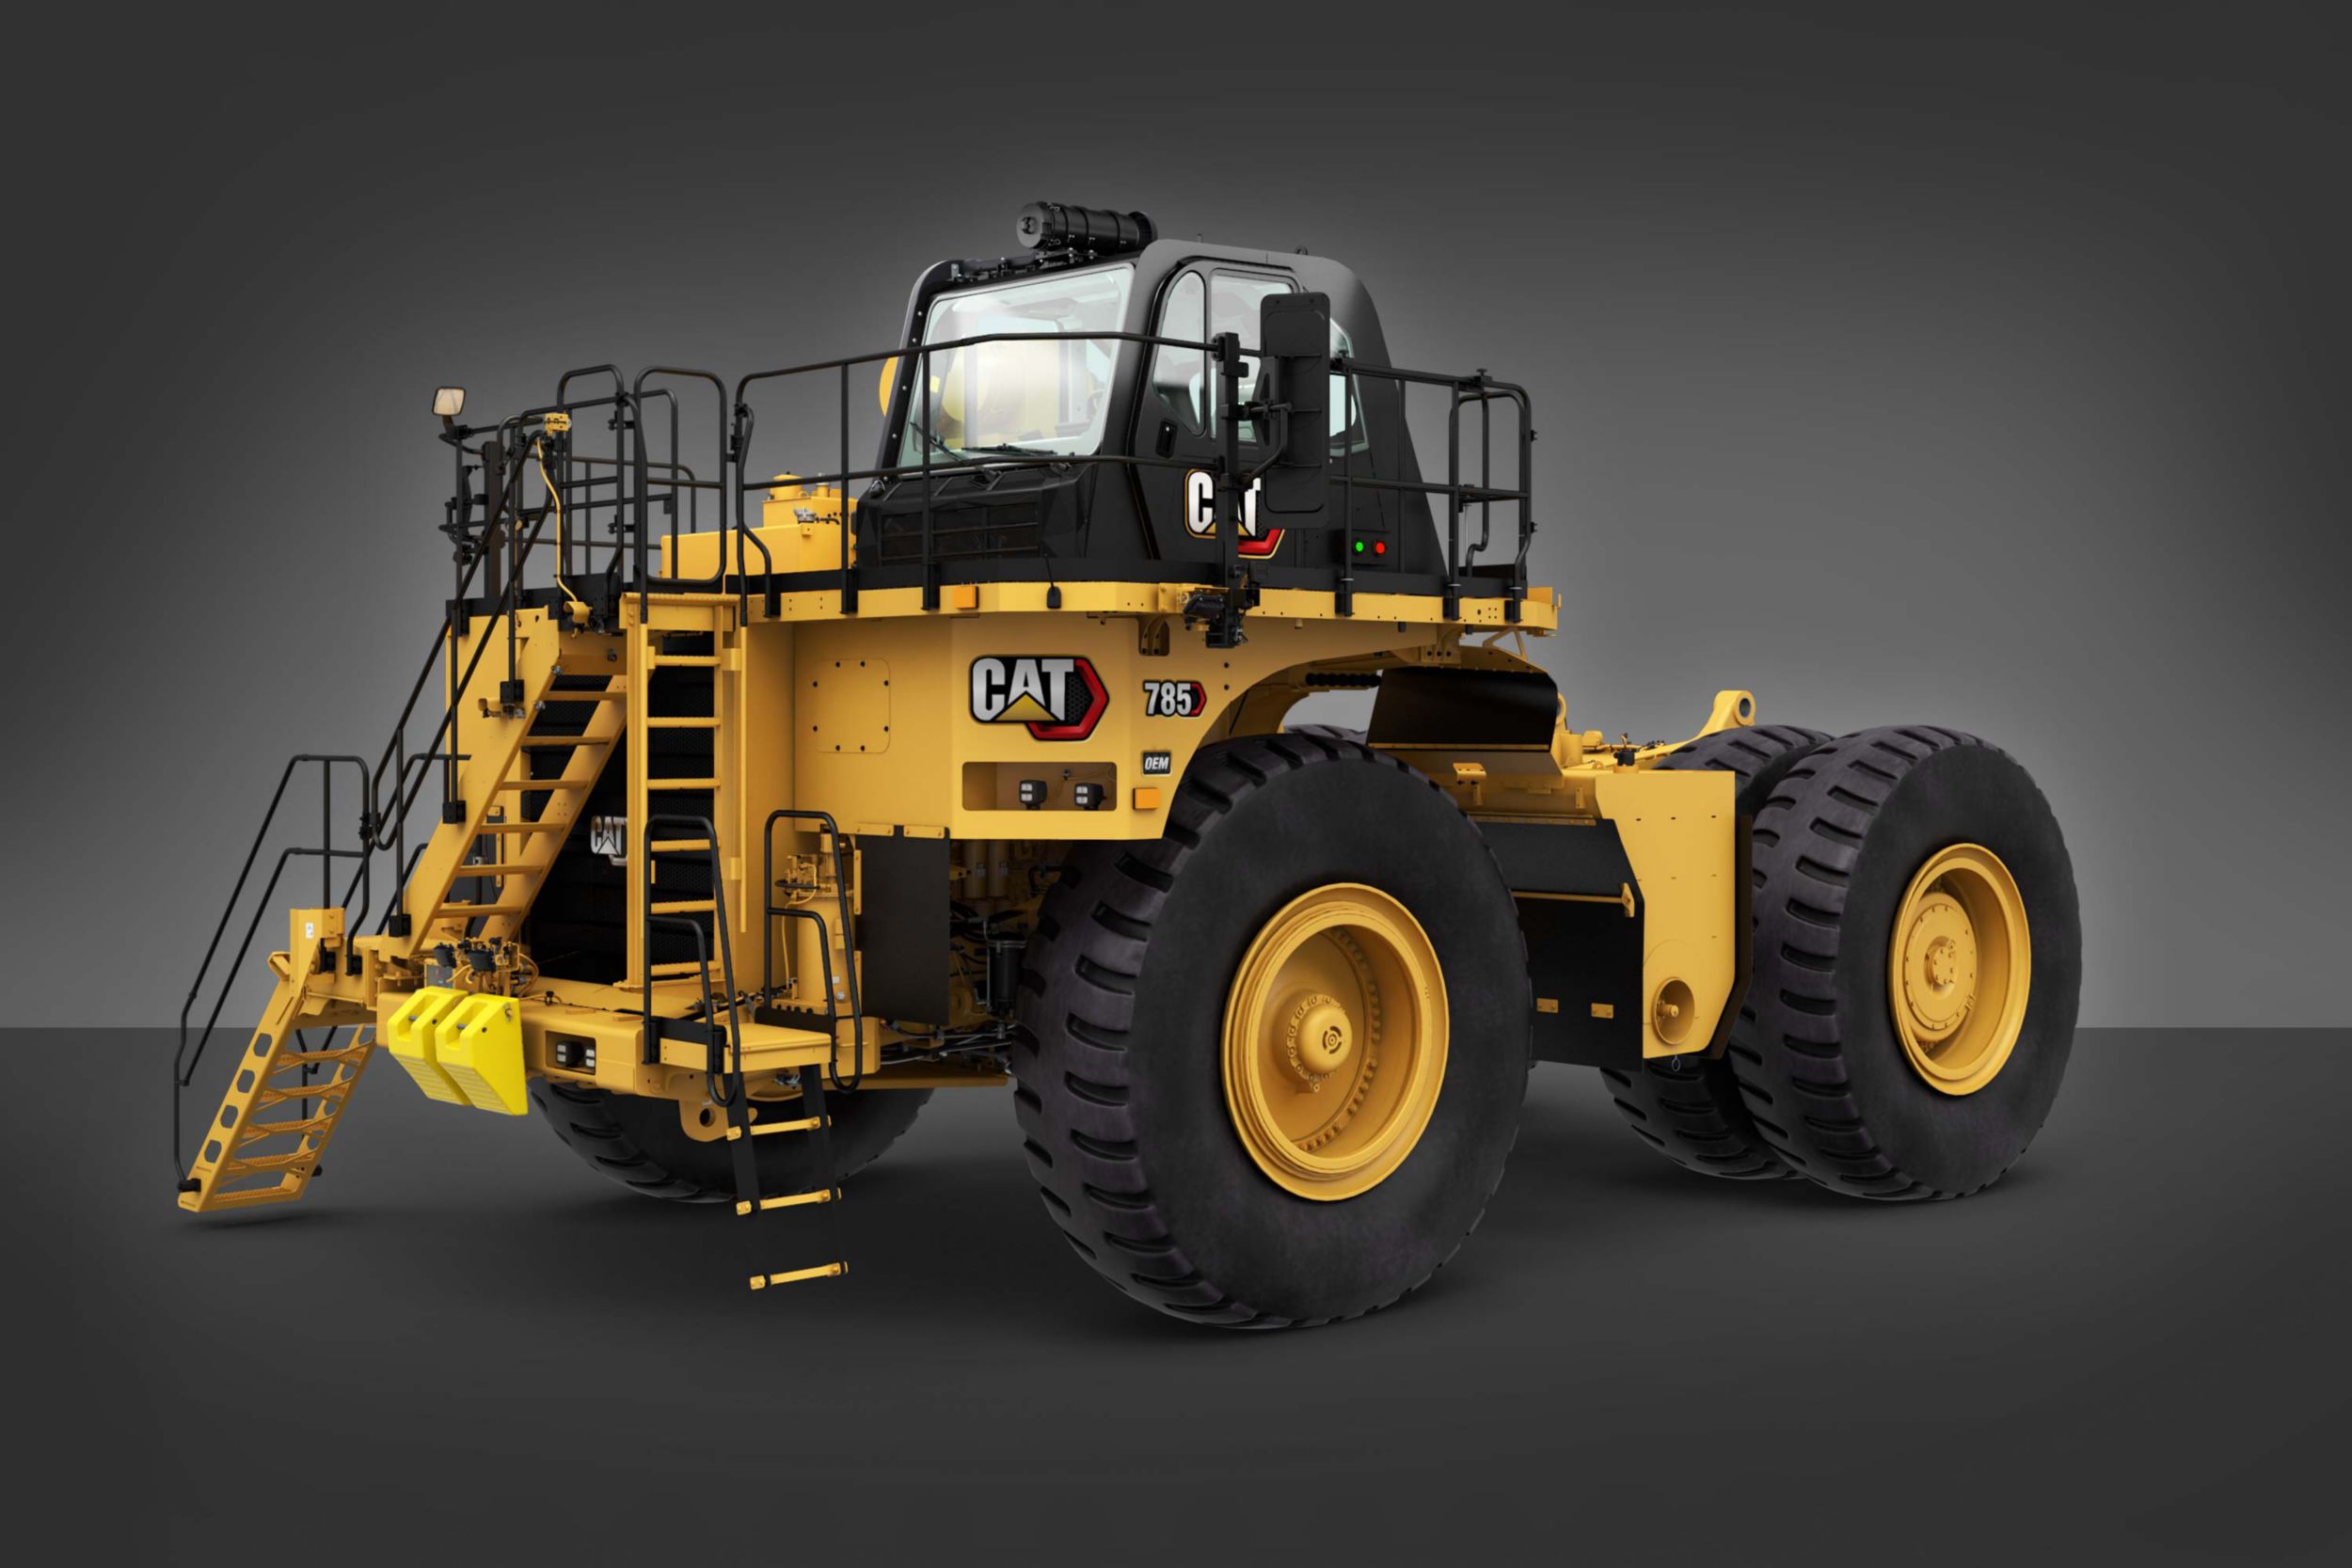 The 785 bare chassis comes equipped with a higher Tractor ROPS certification ratings needed for specialty machines including water trucks, tow trucks, and fuel and lube trucks.